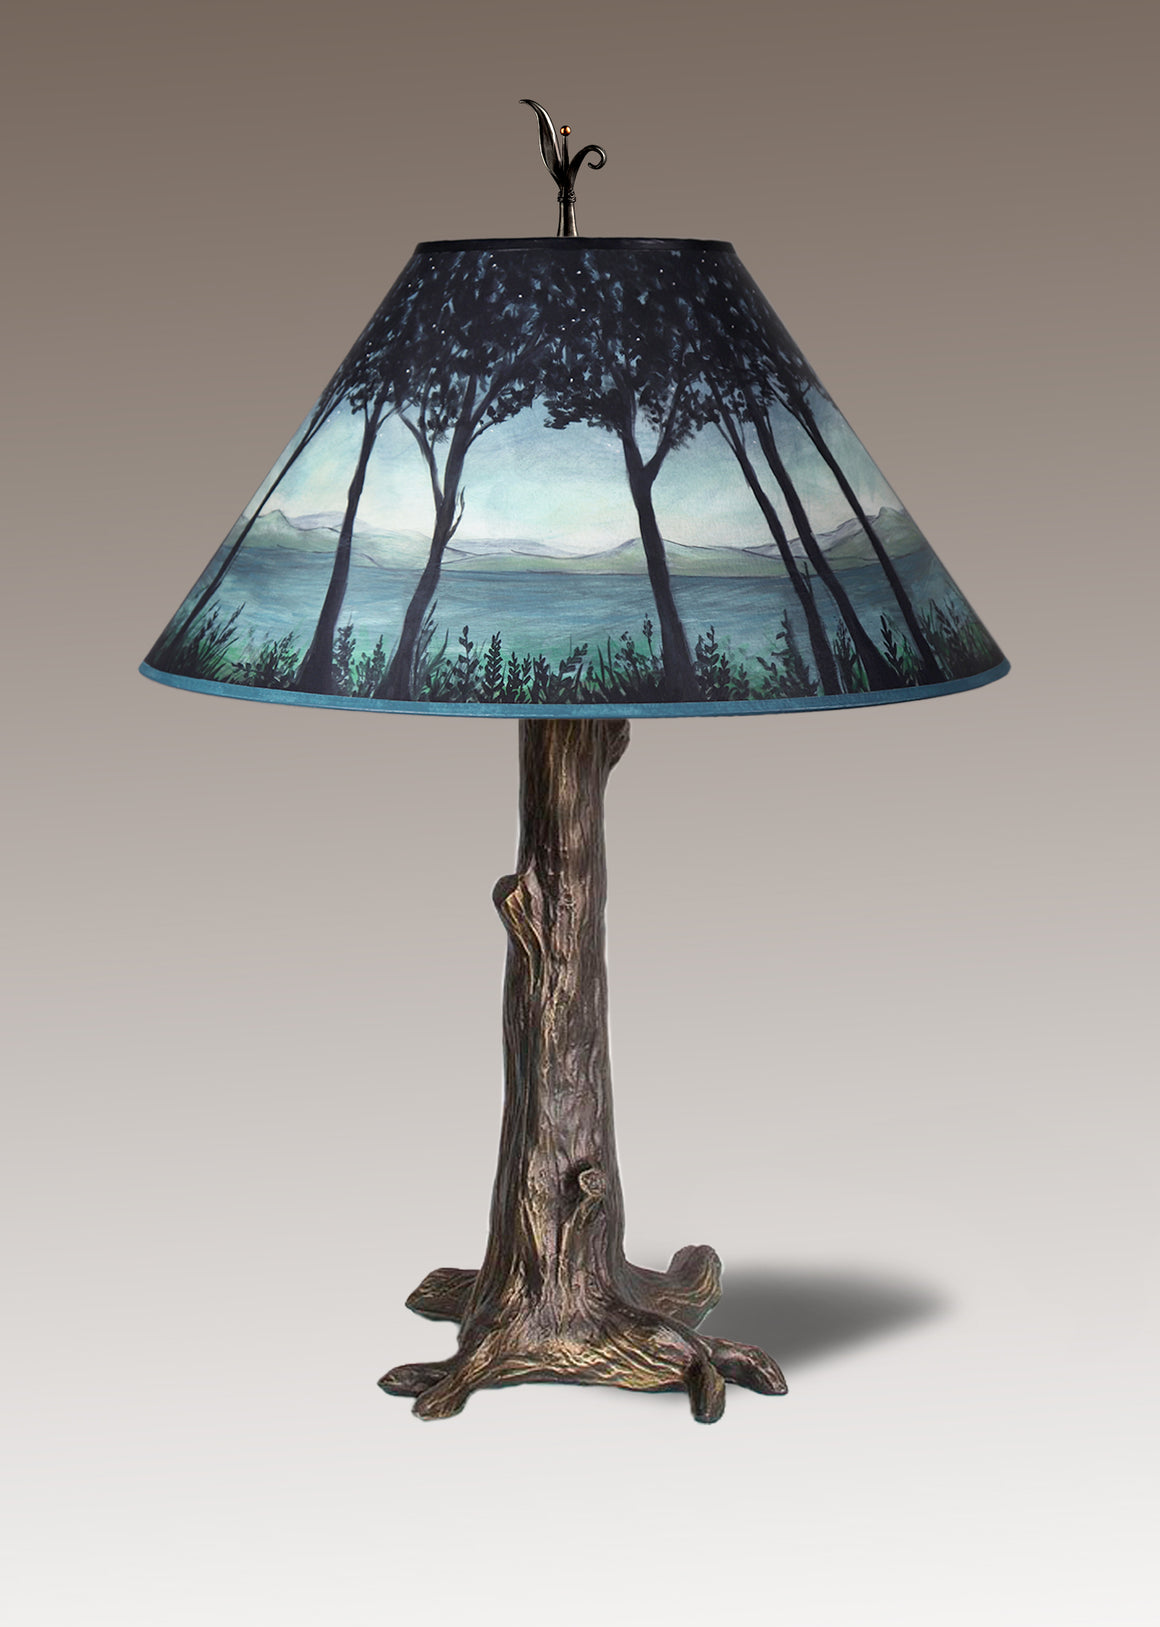 Bronze Tree Table Lamp with Large Conical Shade in Twilight